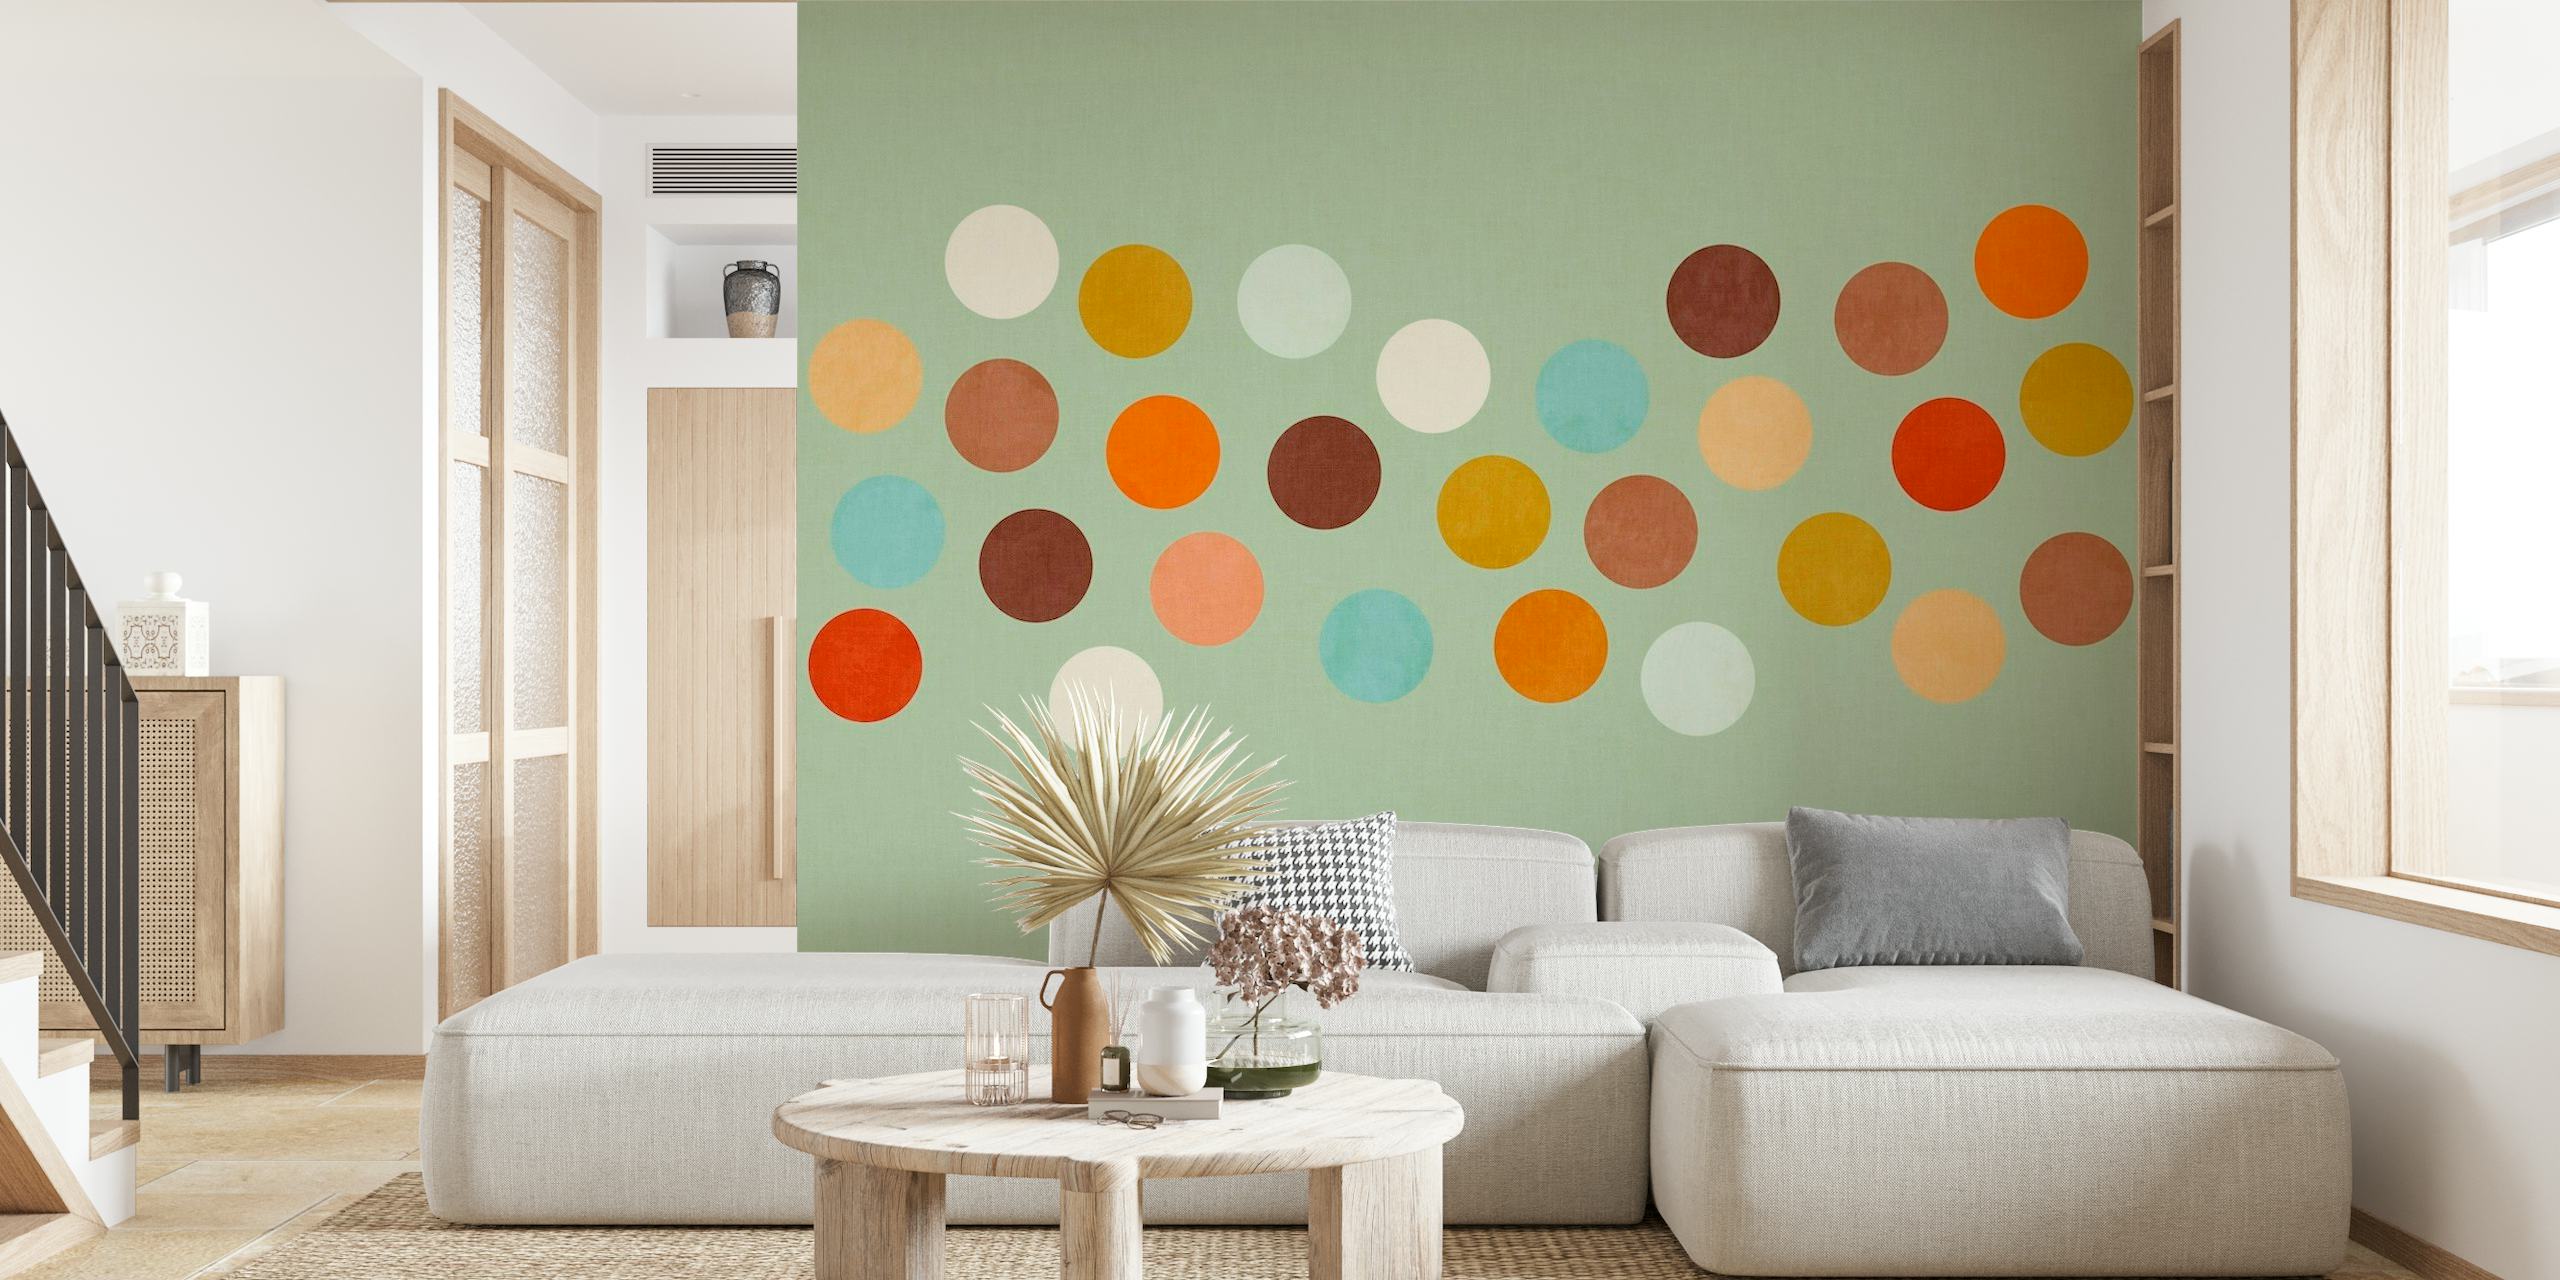 Mid-century style wall mural with a pattern of colorful dots in retro shades over a muted background.